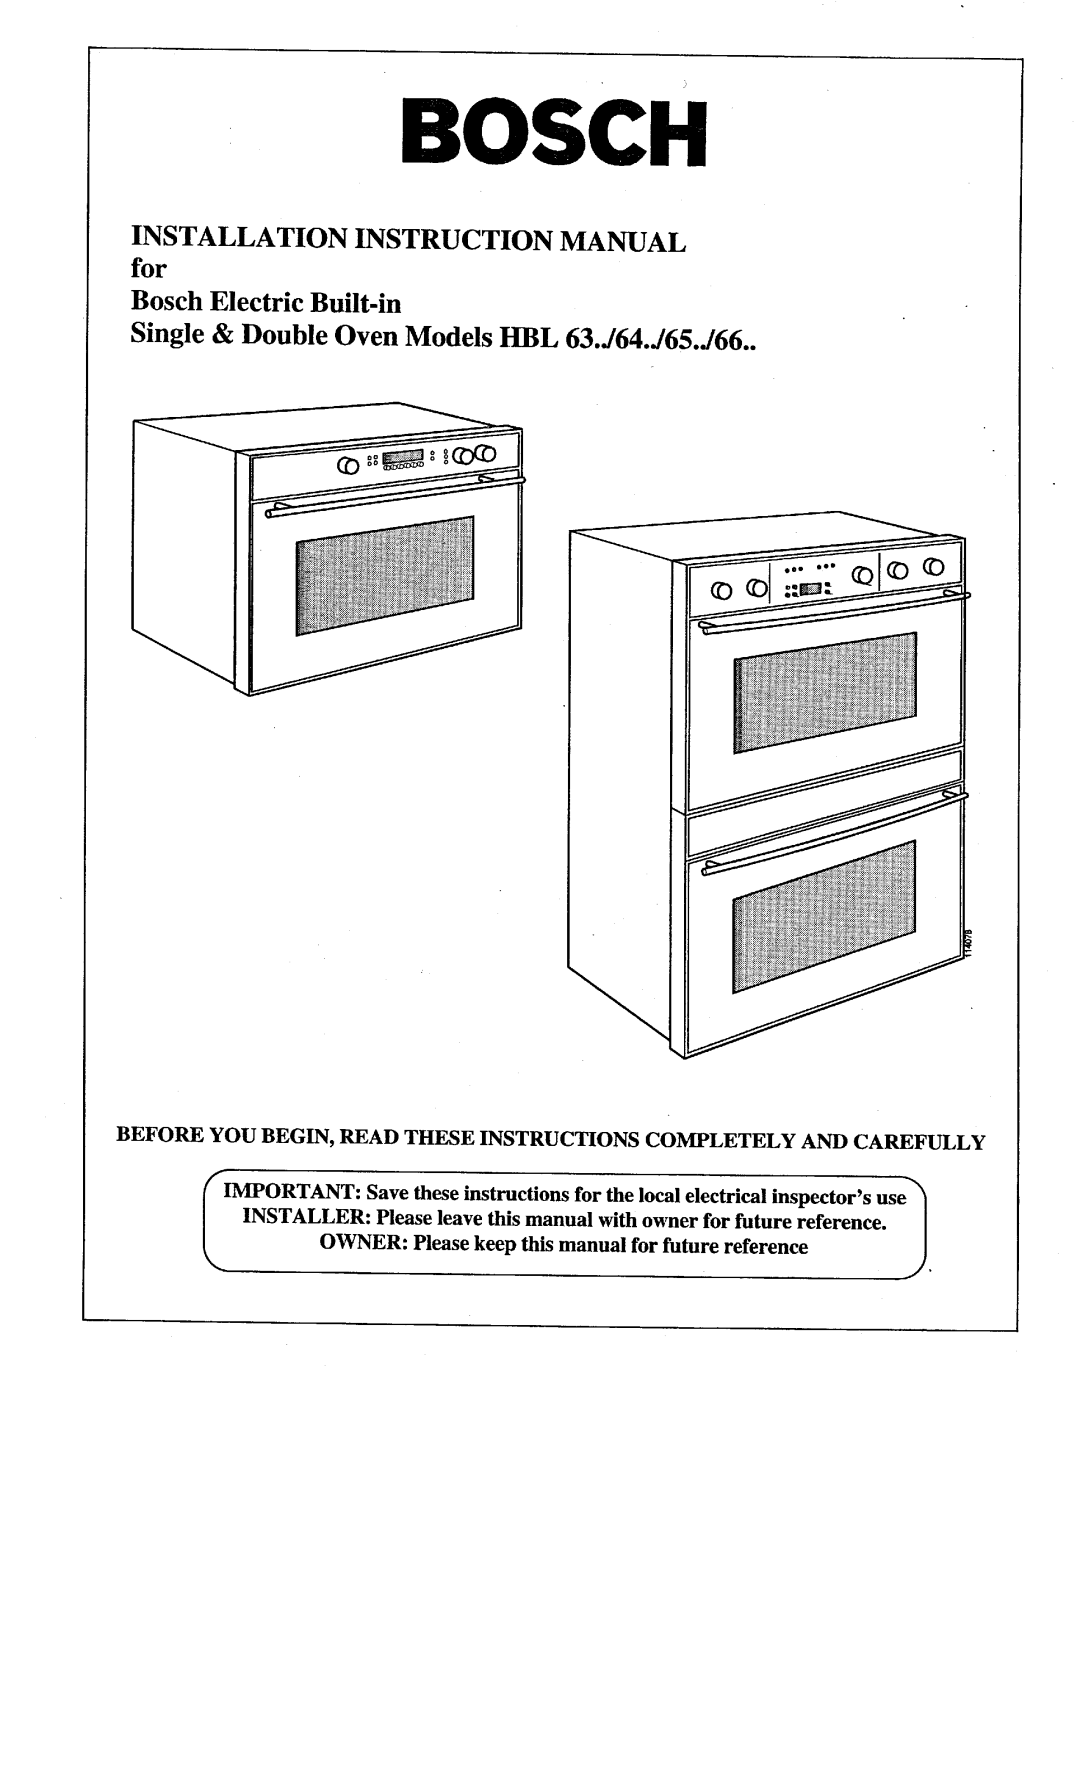 Bosch Appliances HBL 63, HBL 64 manuel dutilisation Use and Care Manual for Bosch Electric Built-in, HBN 64../65../66 